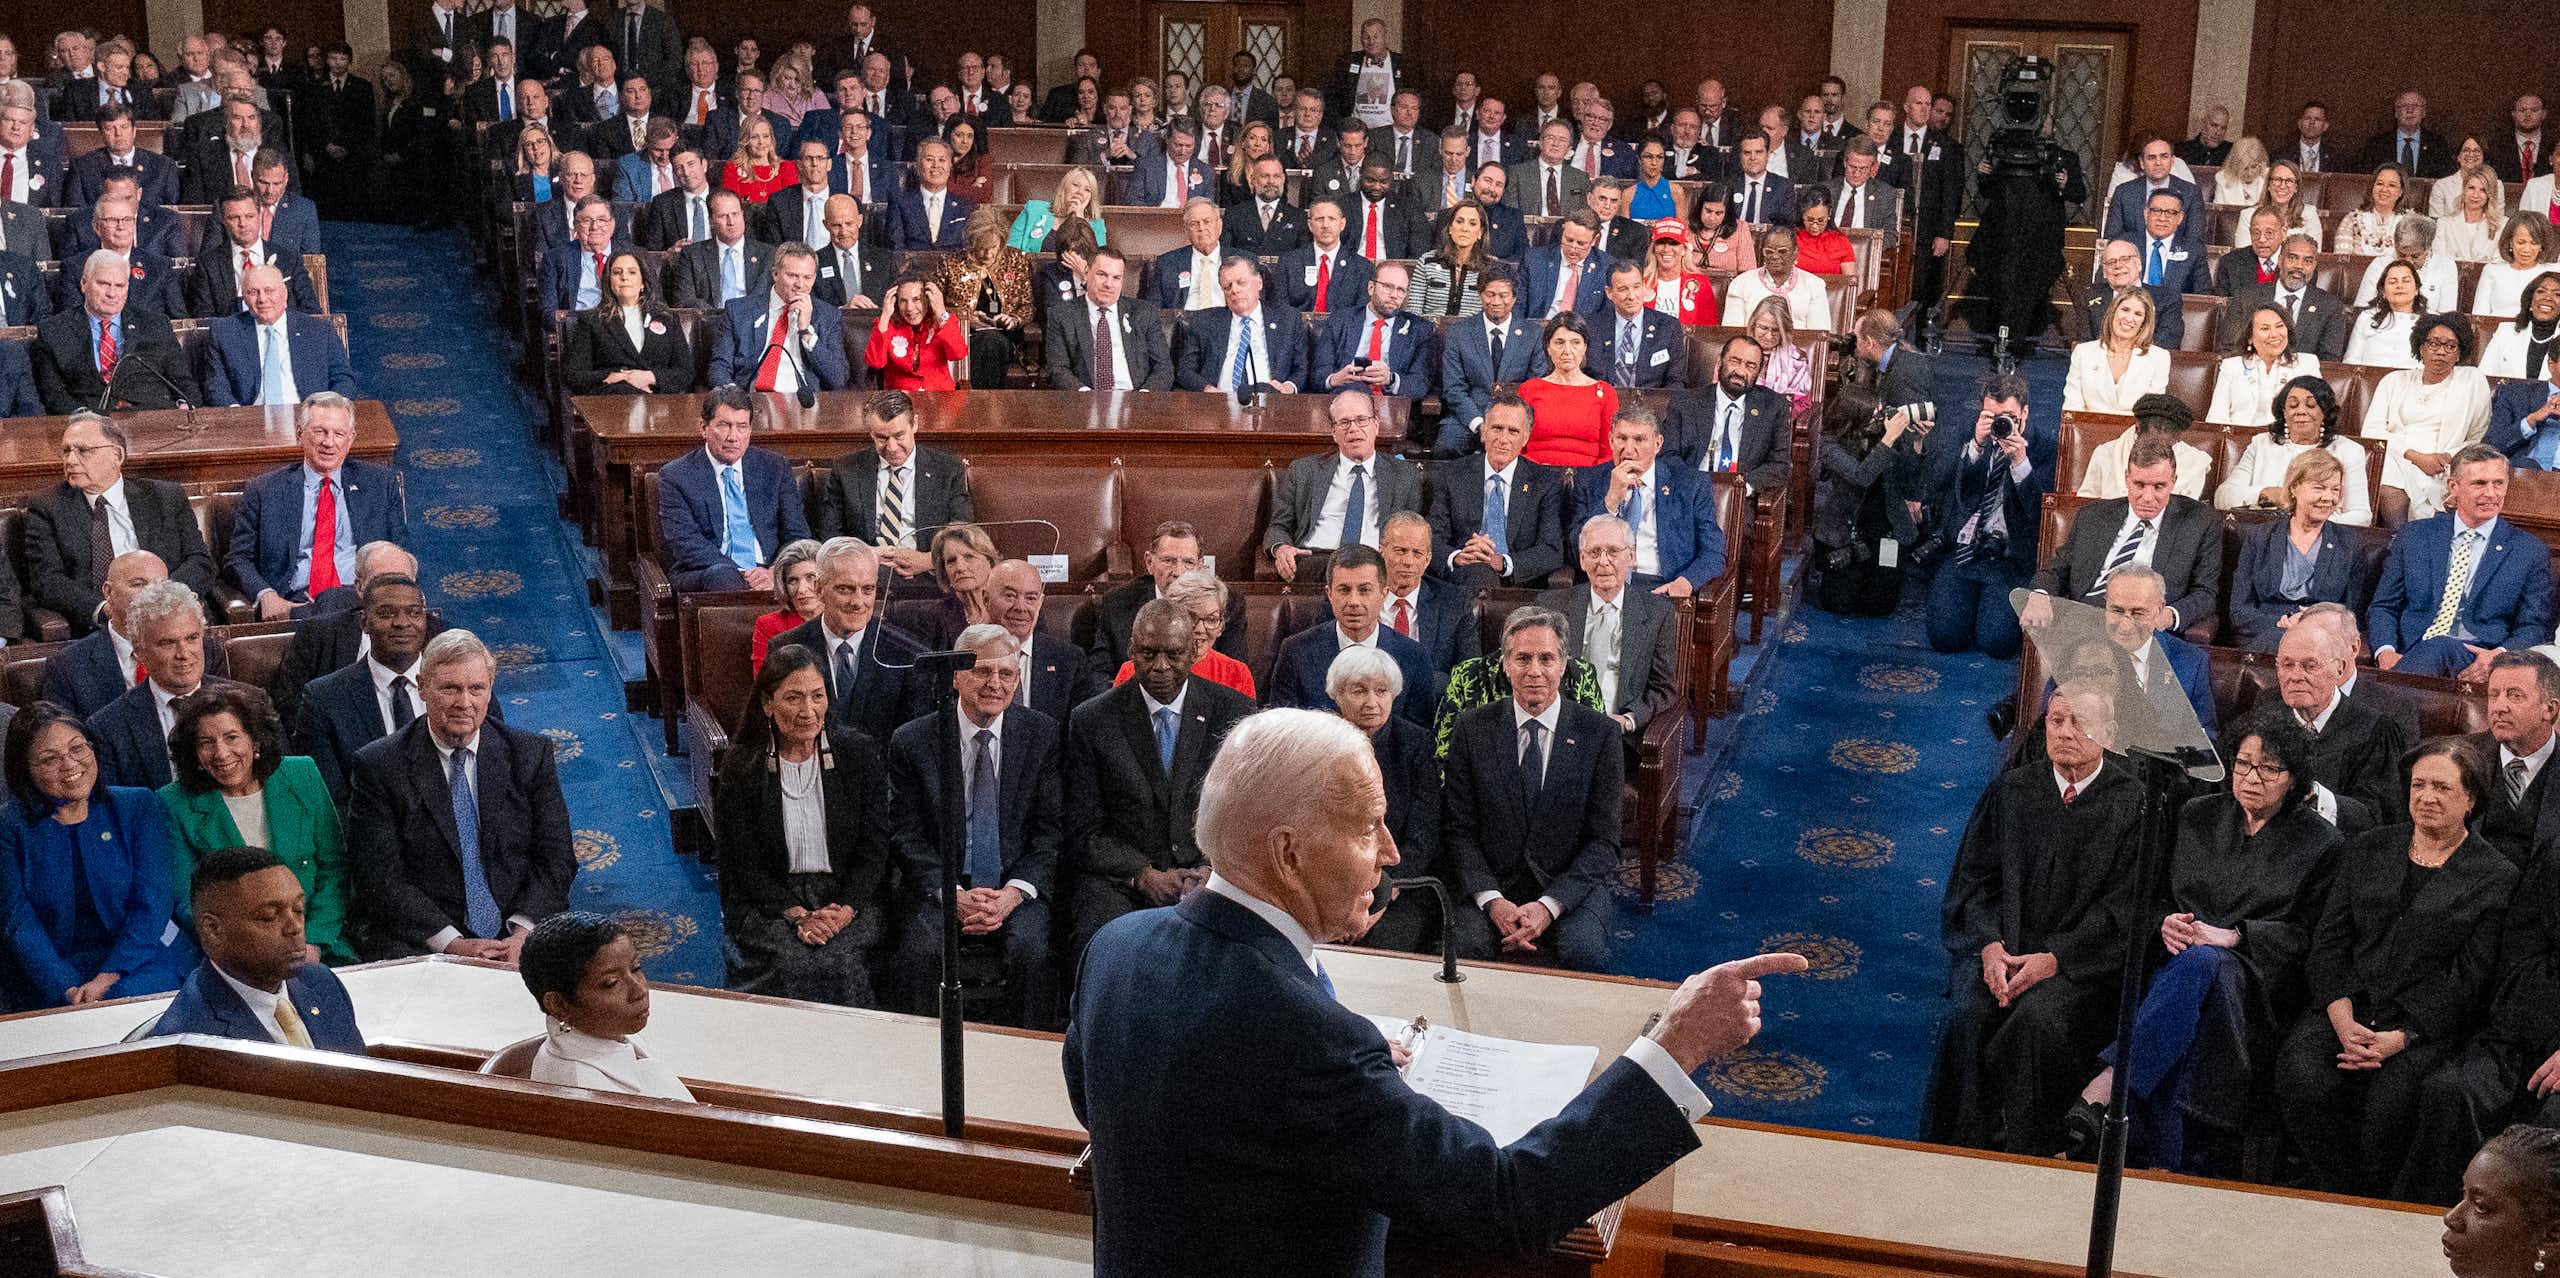 Joe Biden stands at a lectern and points his finger facing a large crowd of people dressed in formal clothing. 